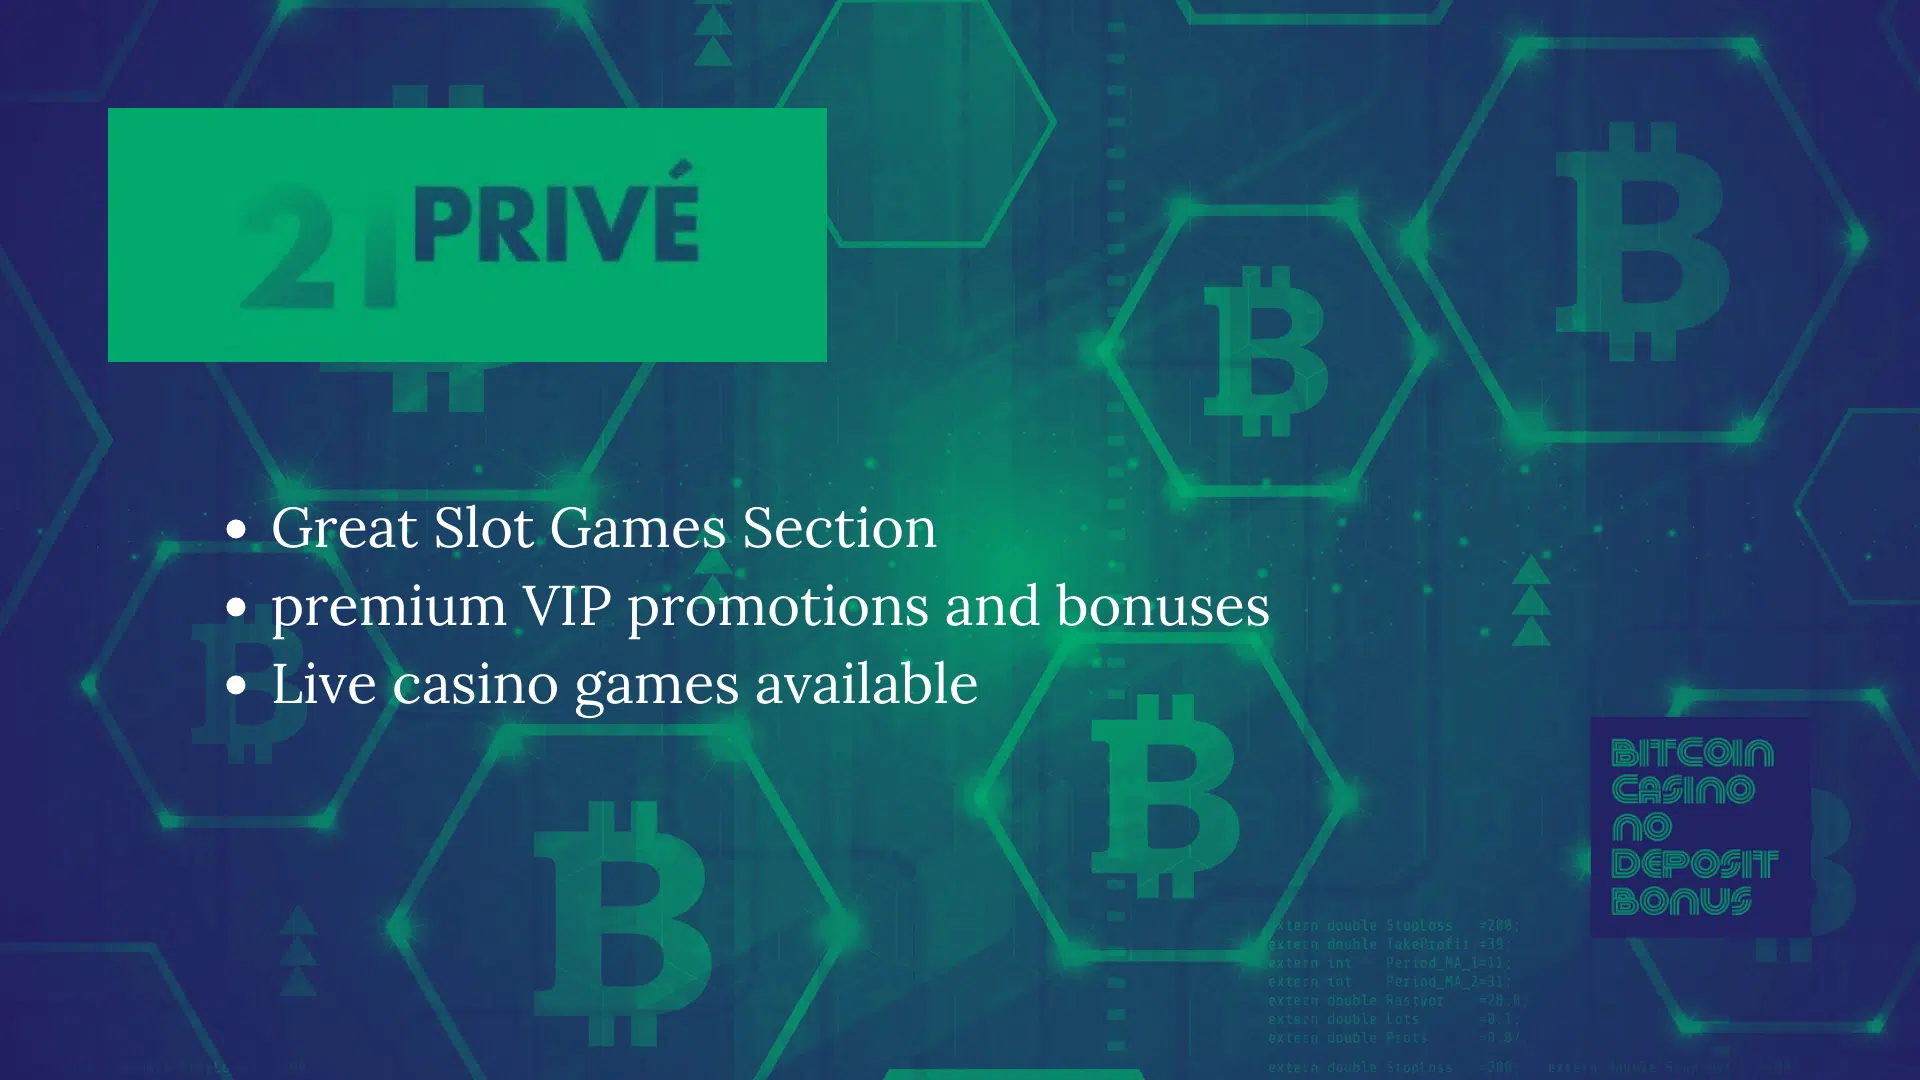 You are currently viewing 21 Prive Casino Bonus Codes – 21Prive.com Free Spins December 2022